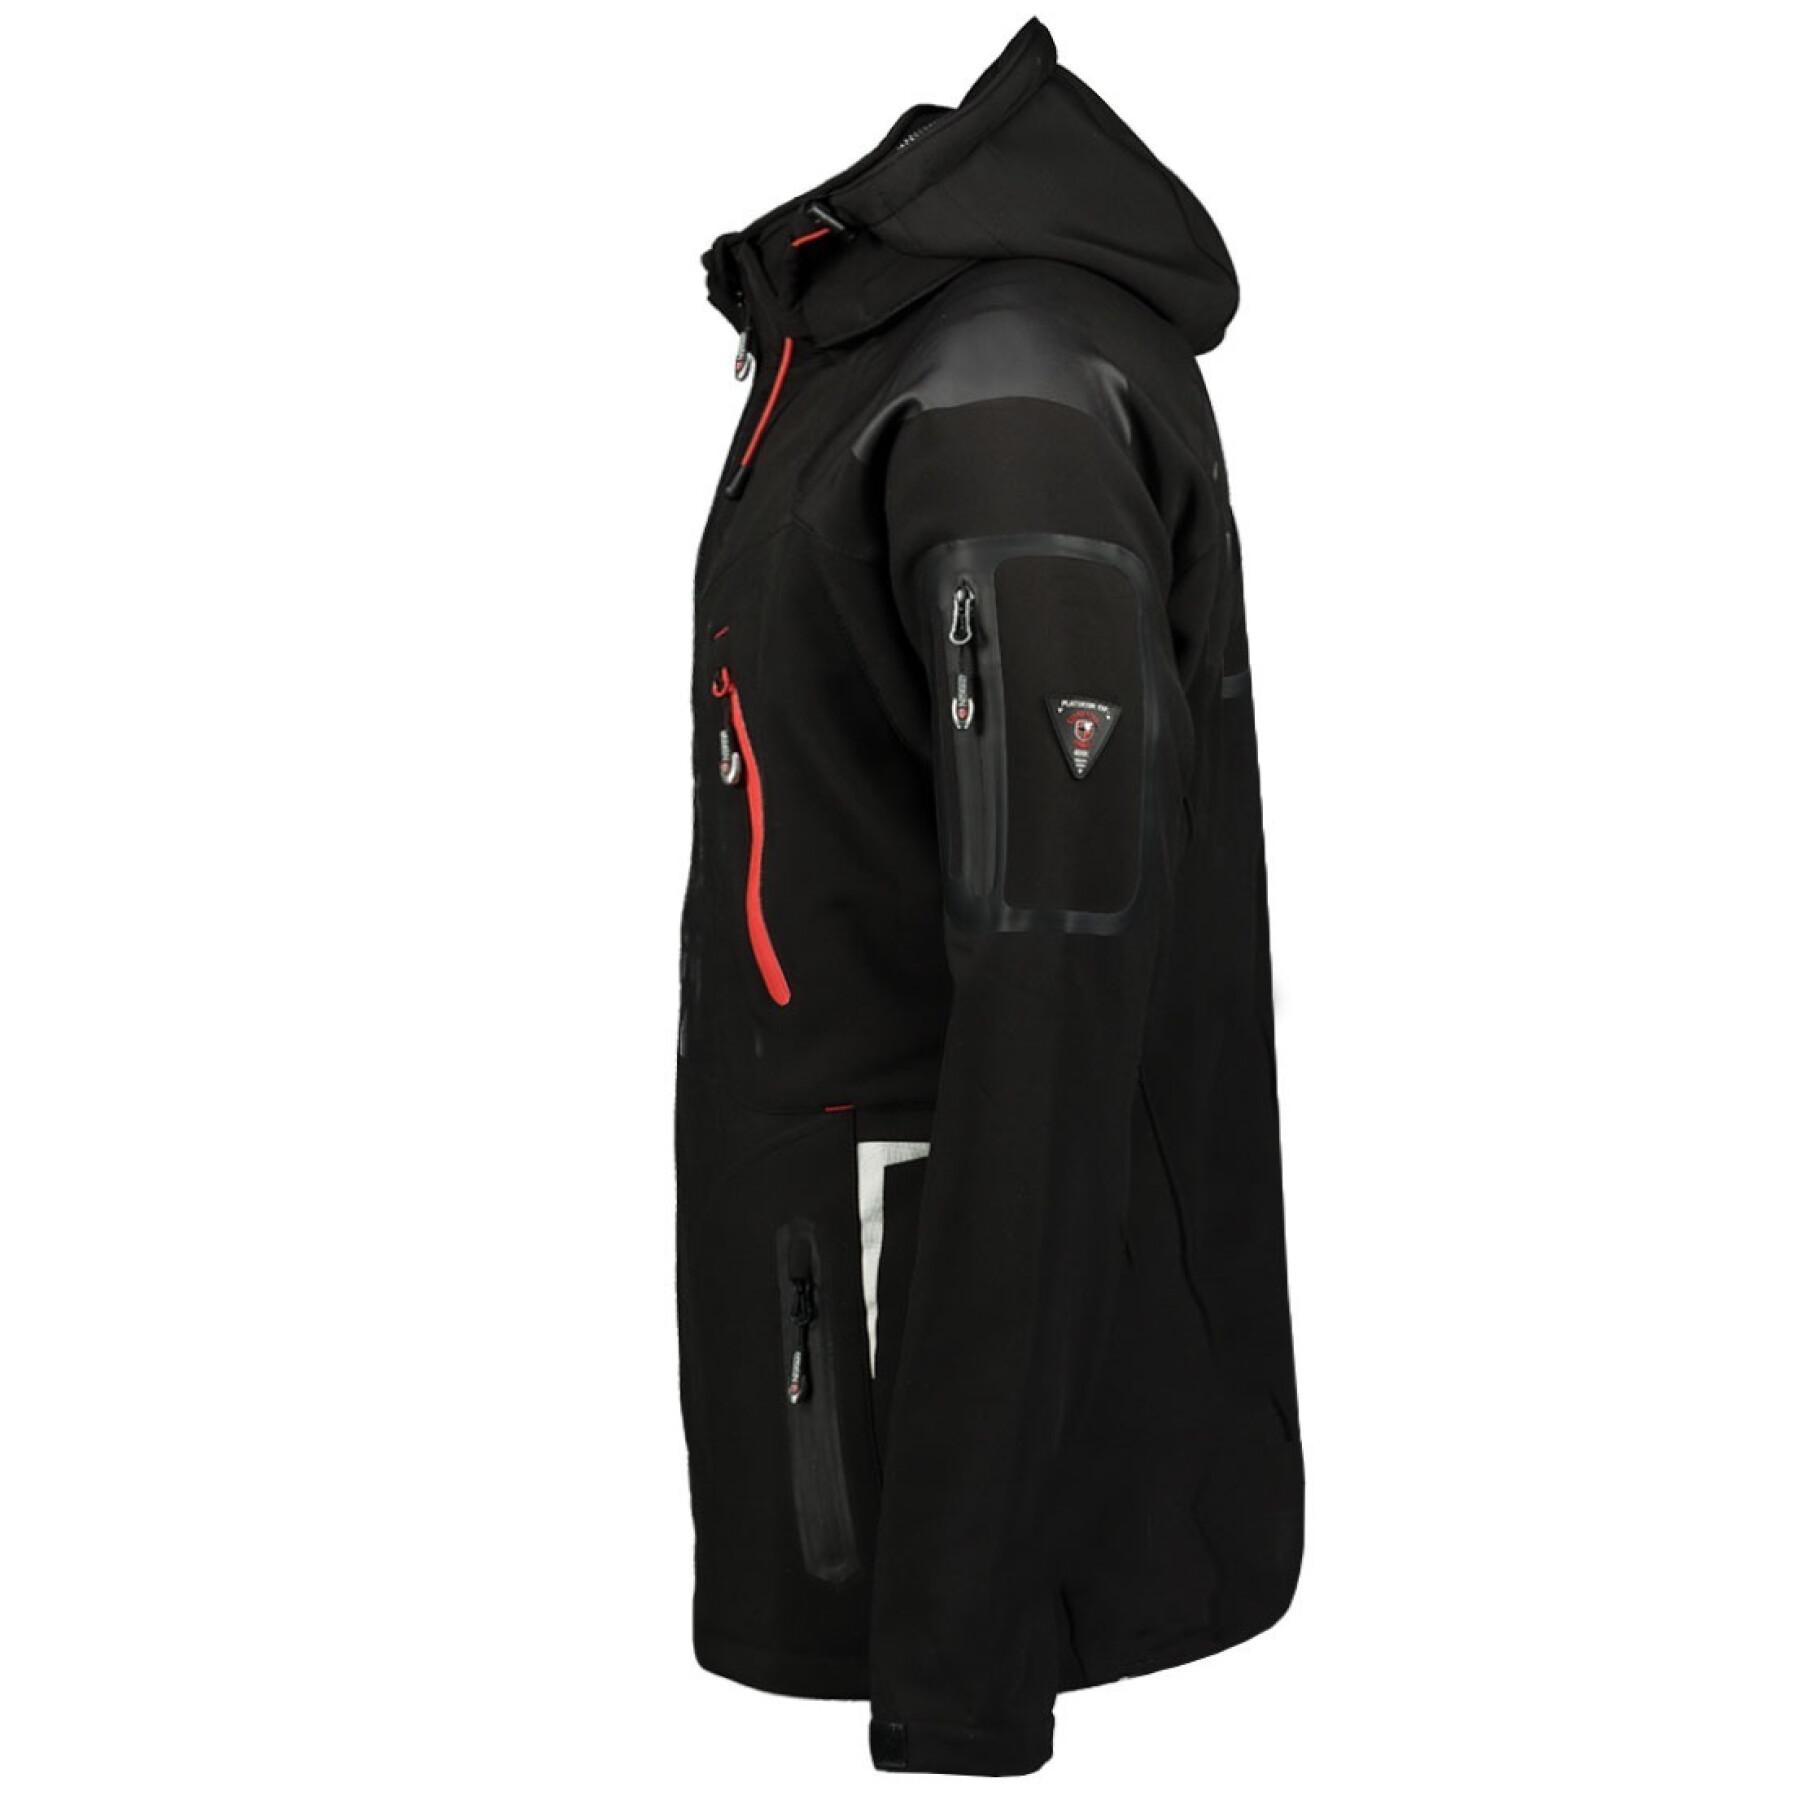 Hooded waterproof jacket Geographical Norway Techno